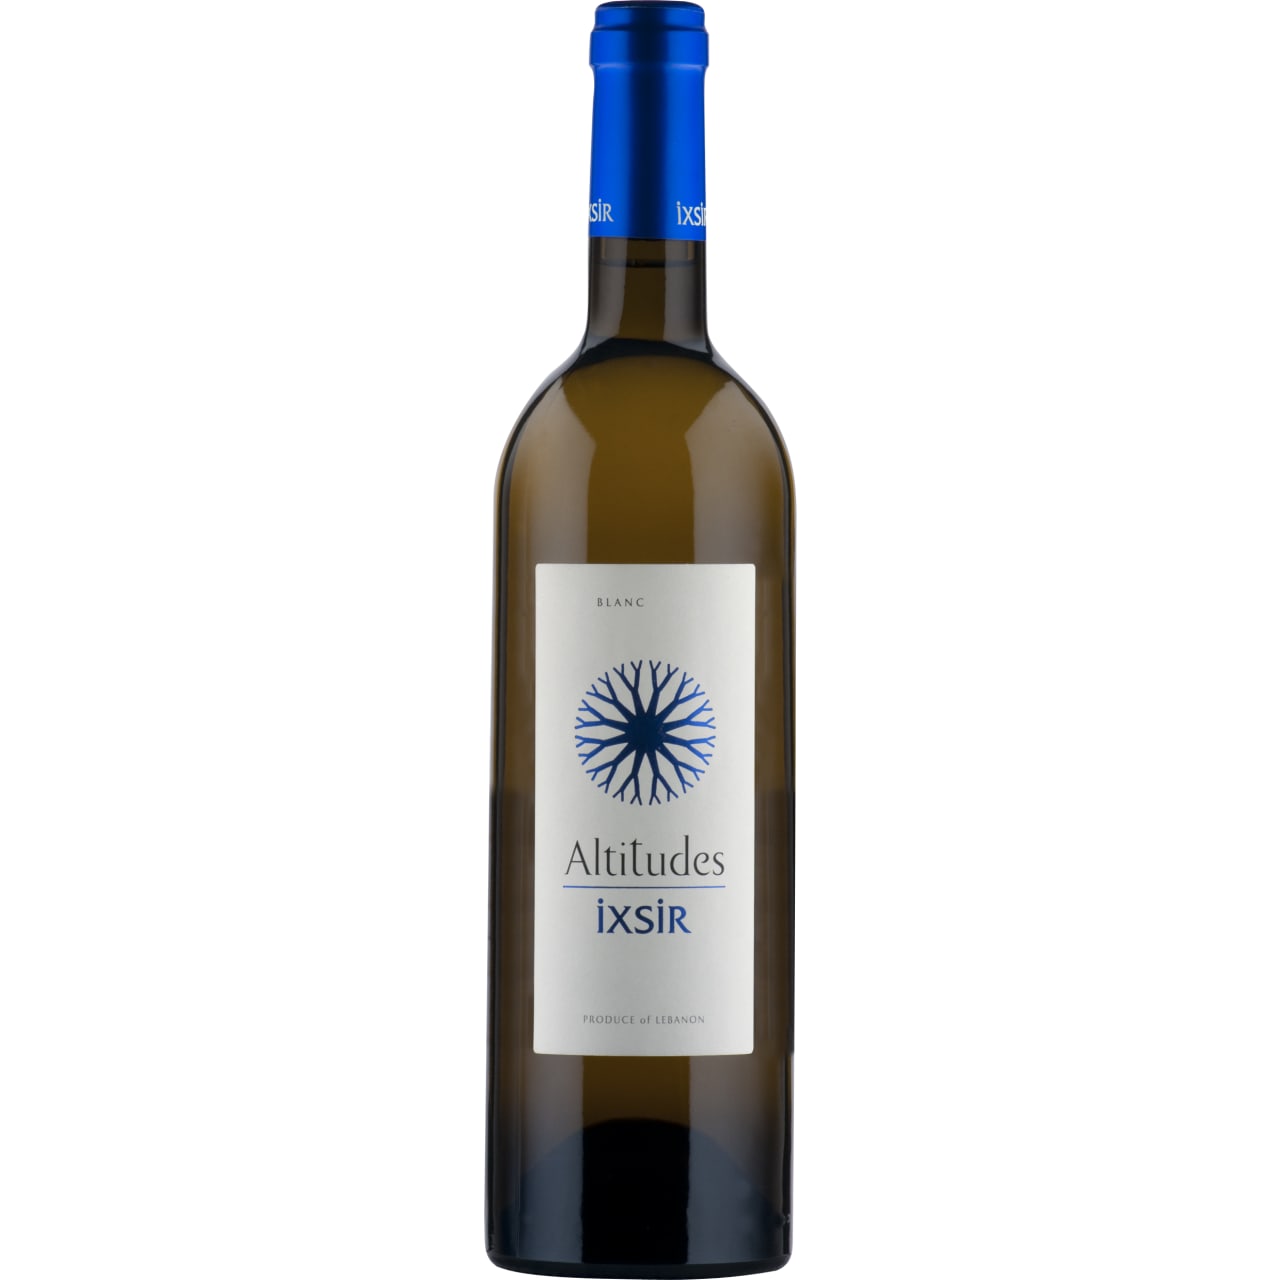 All the thrilling tension of a superb white Bordeaux. A brilliant white - do try it!